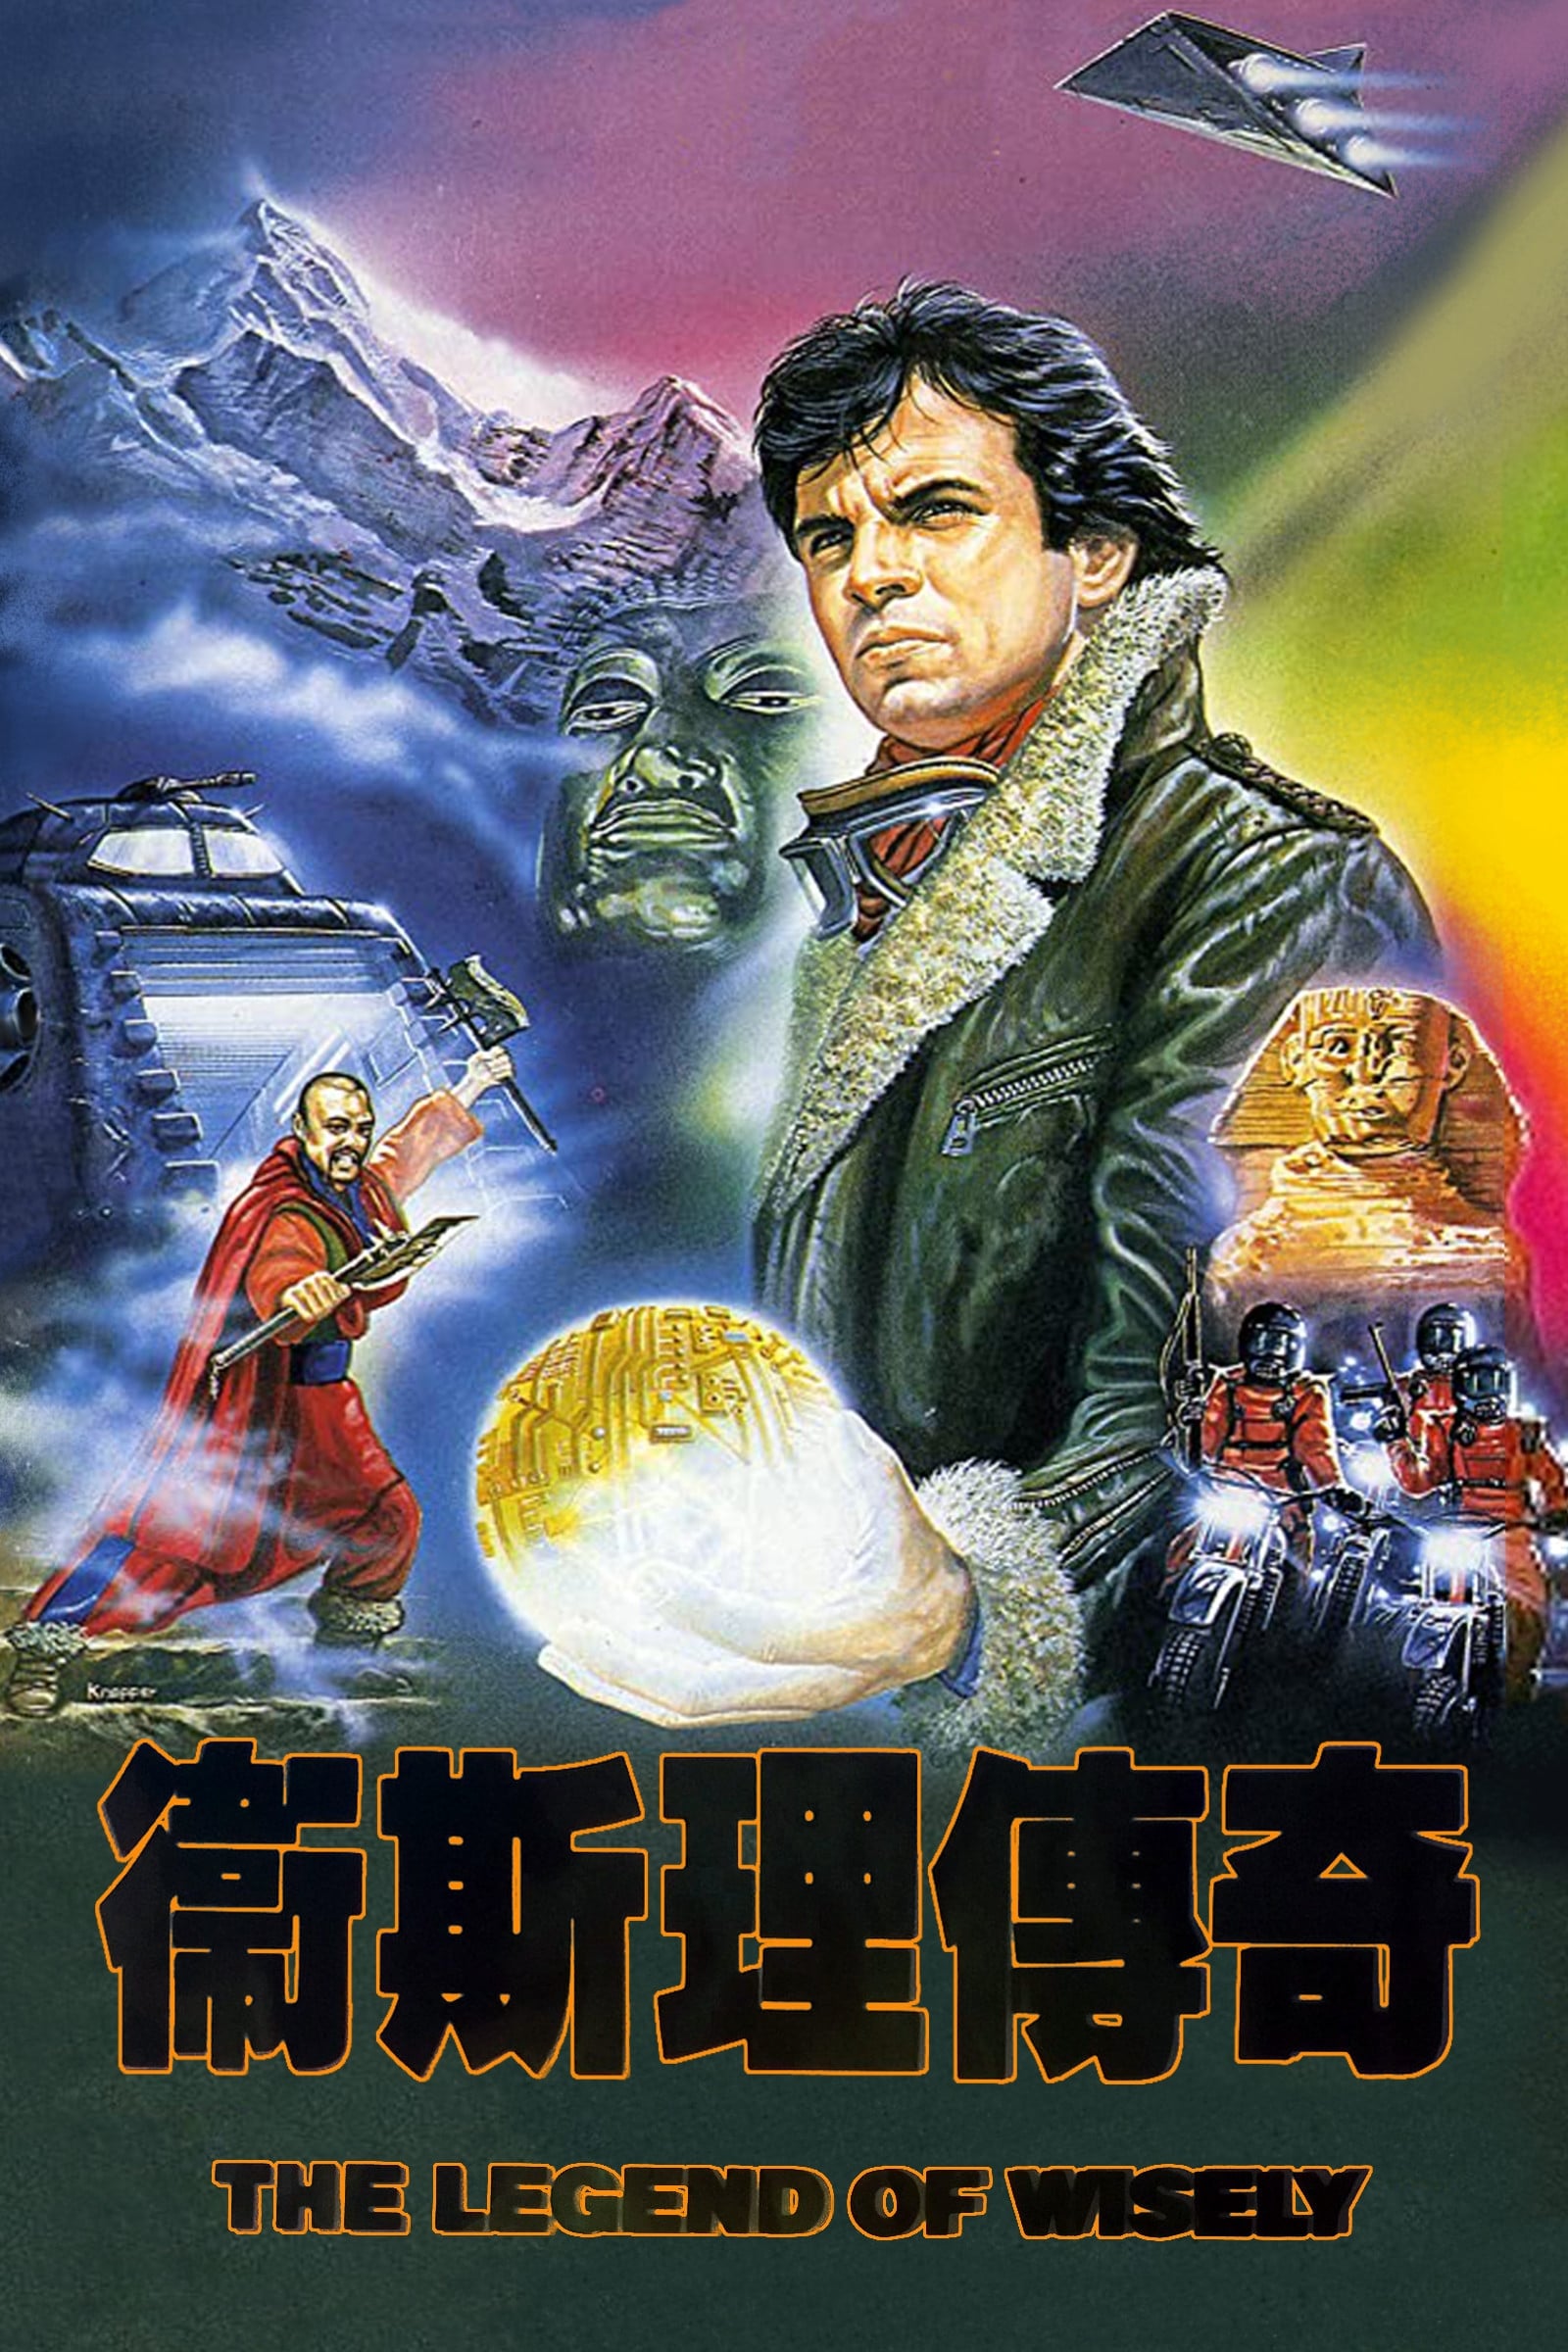 The Legend of Wisely (1987)